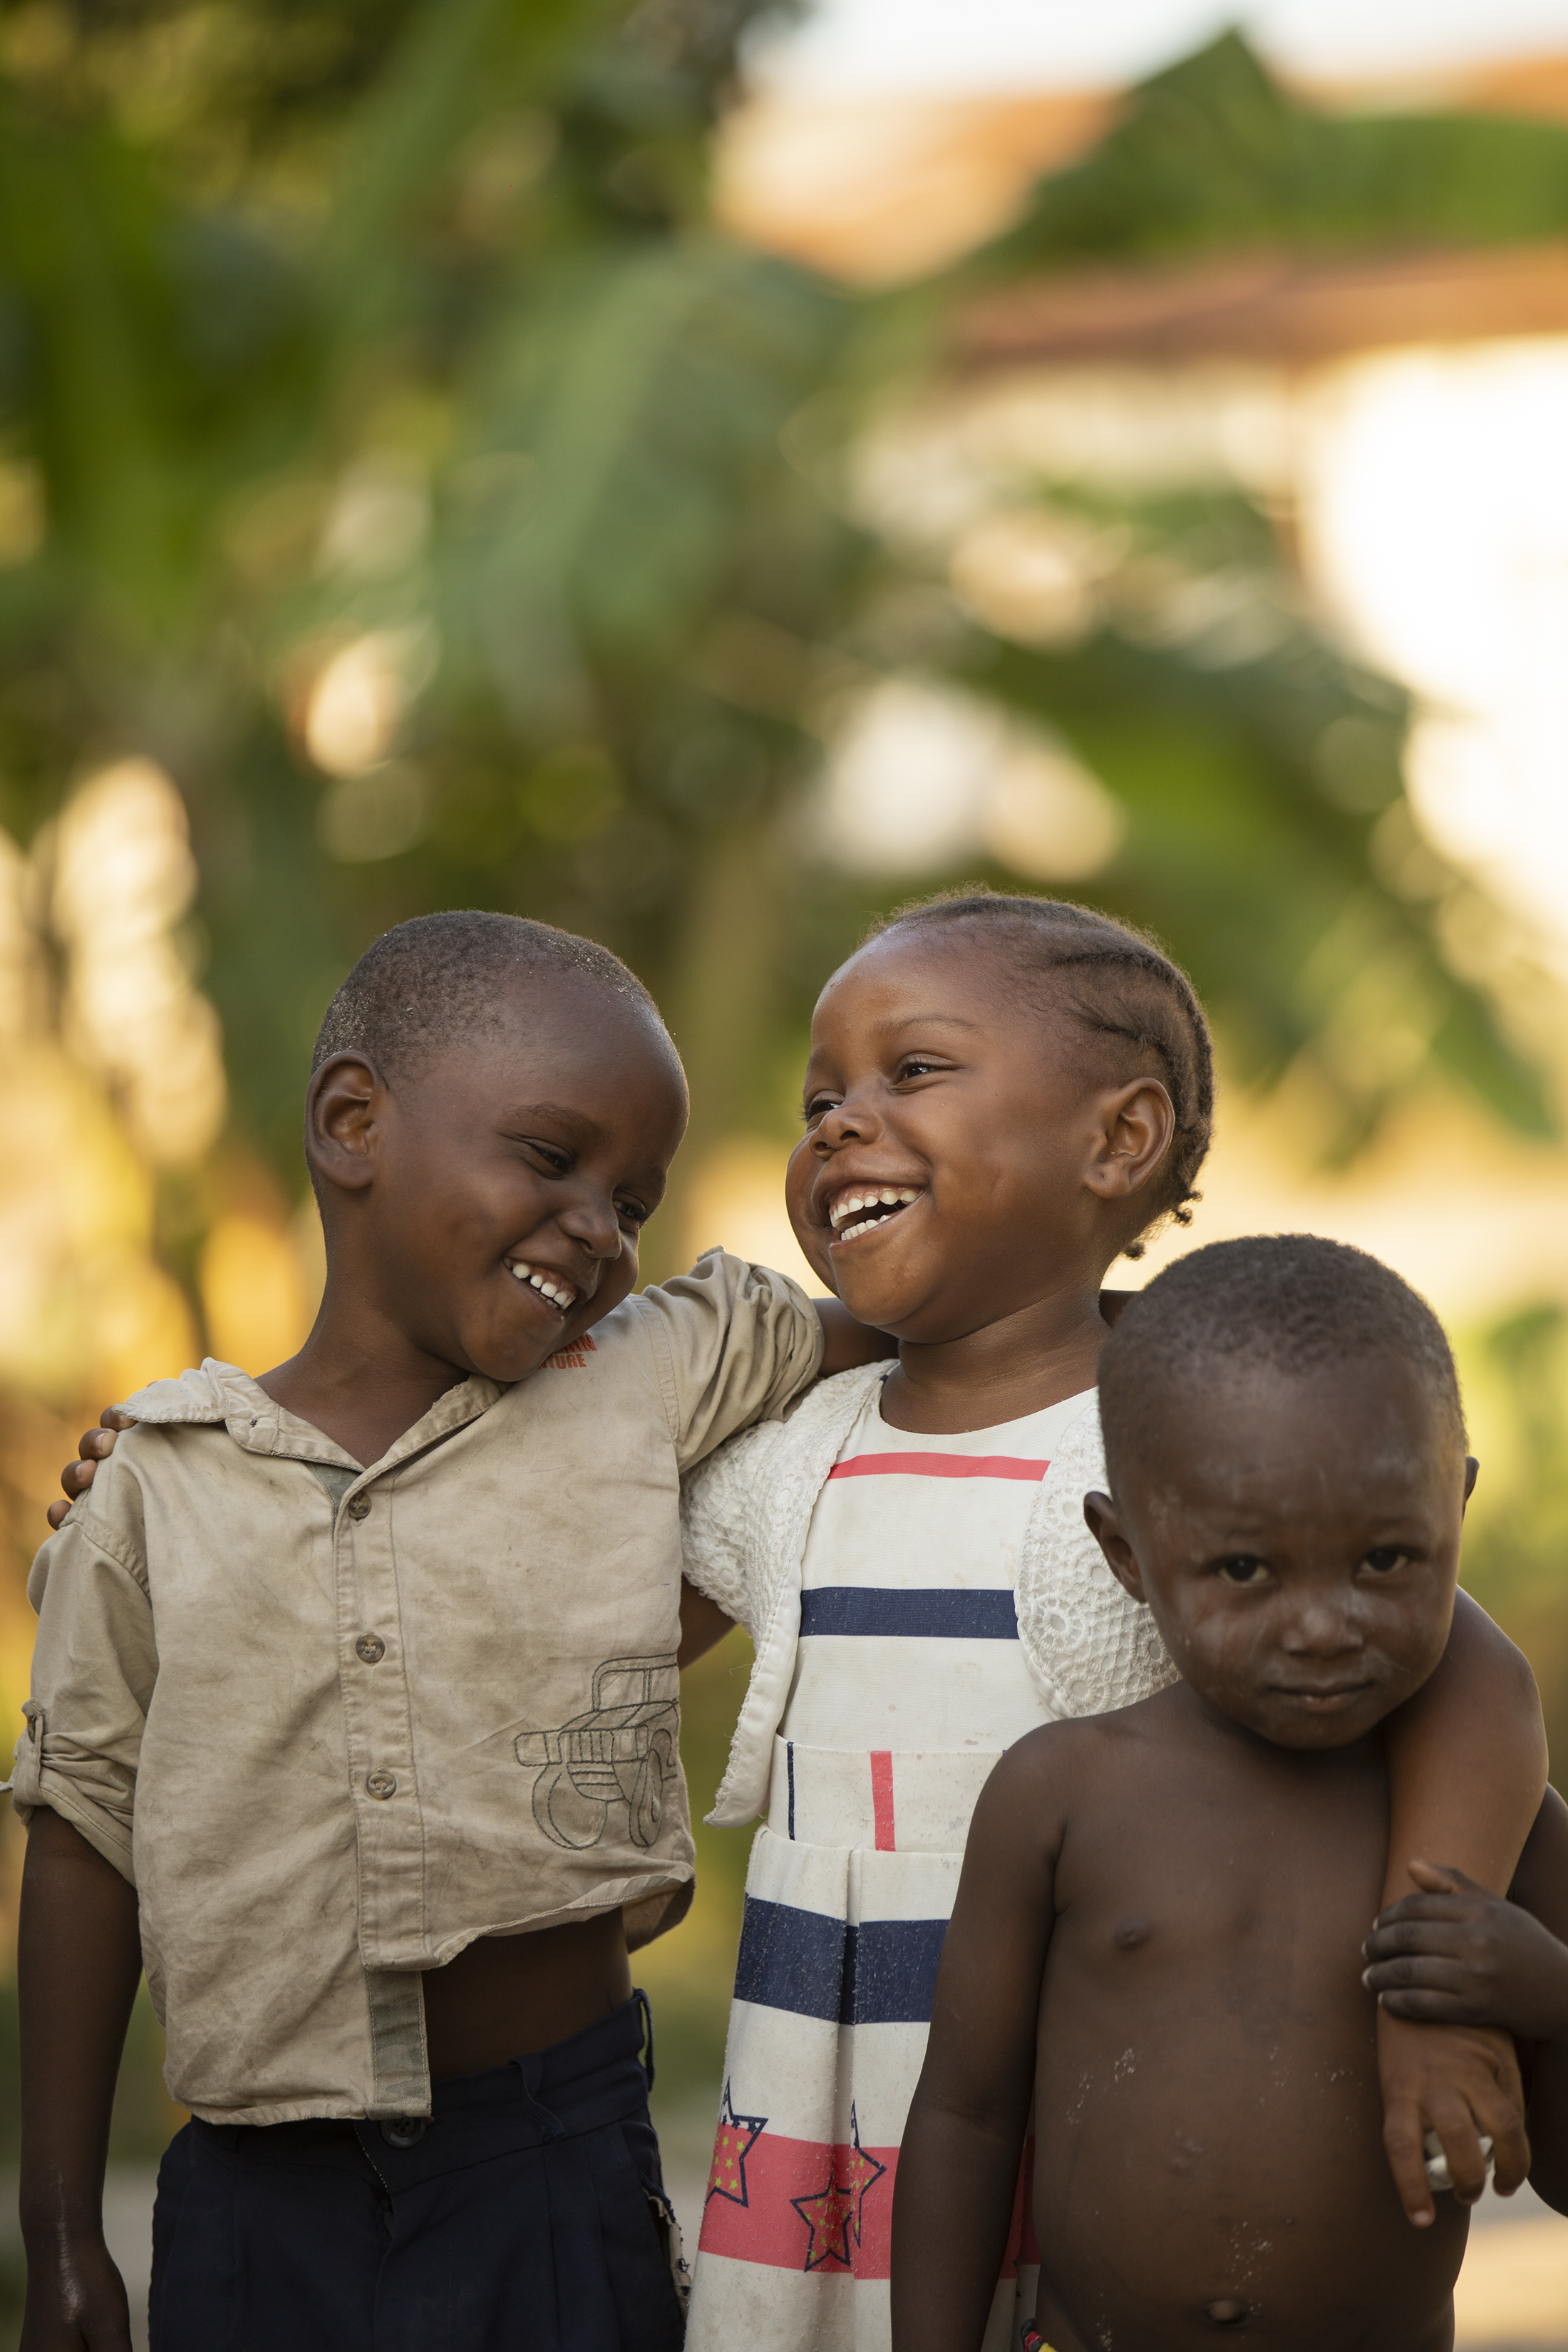 Happy African children embracing on street · Free